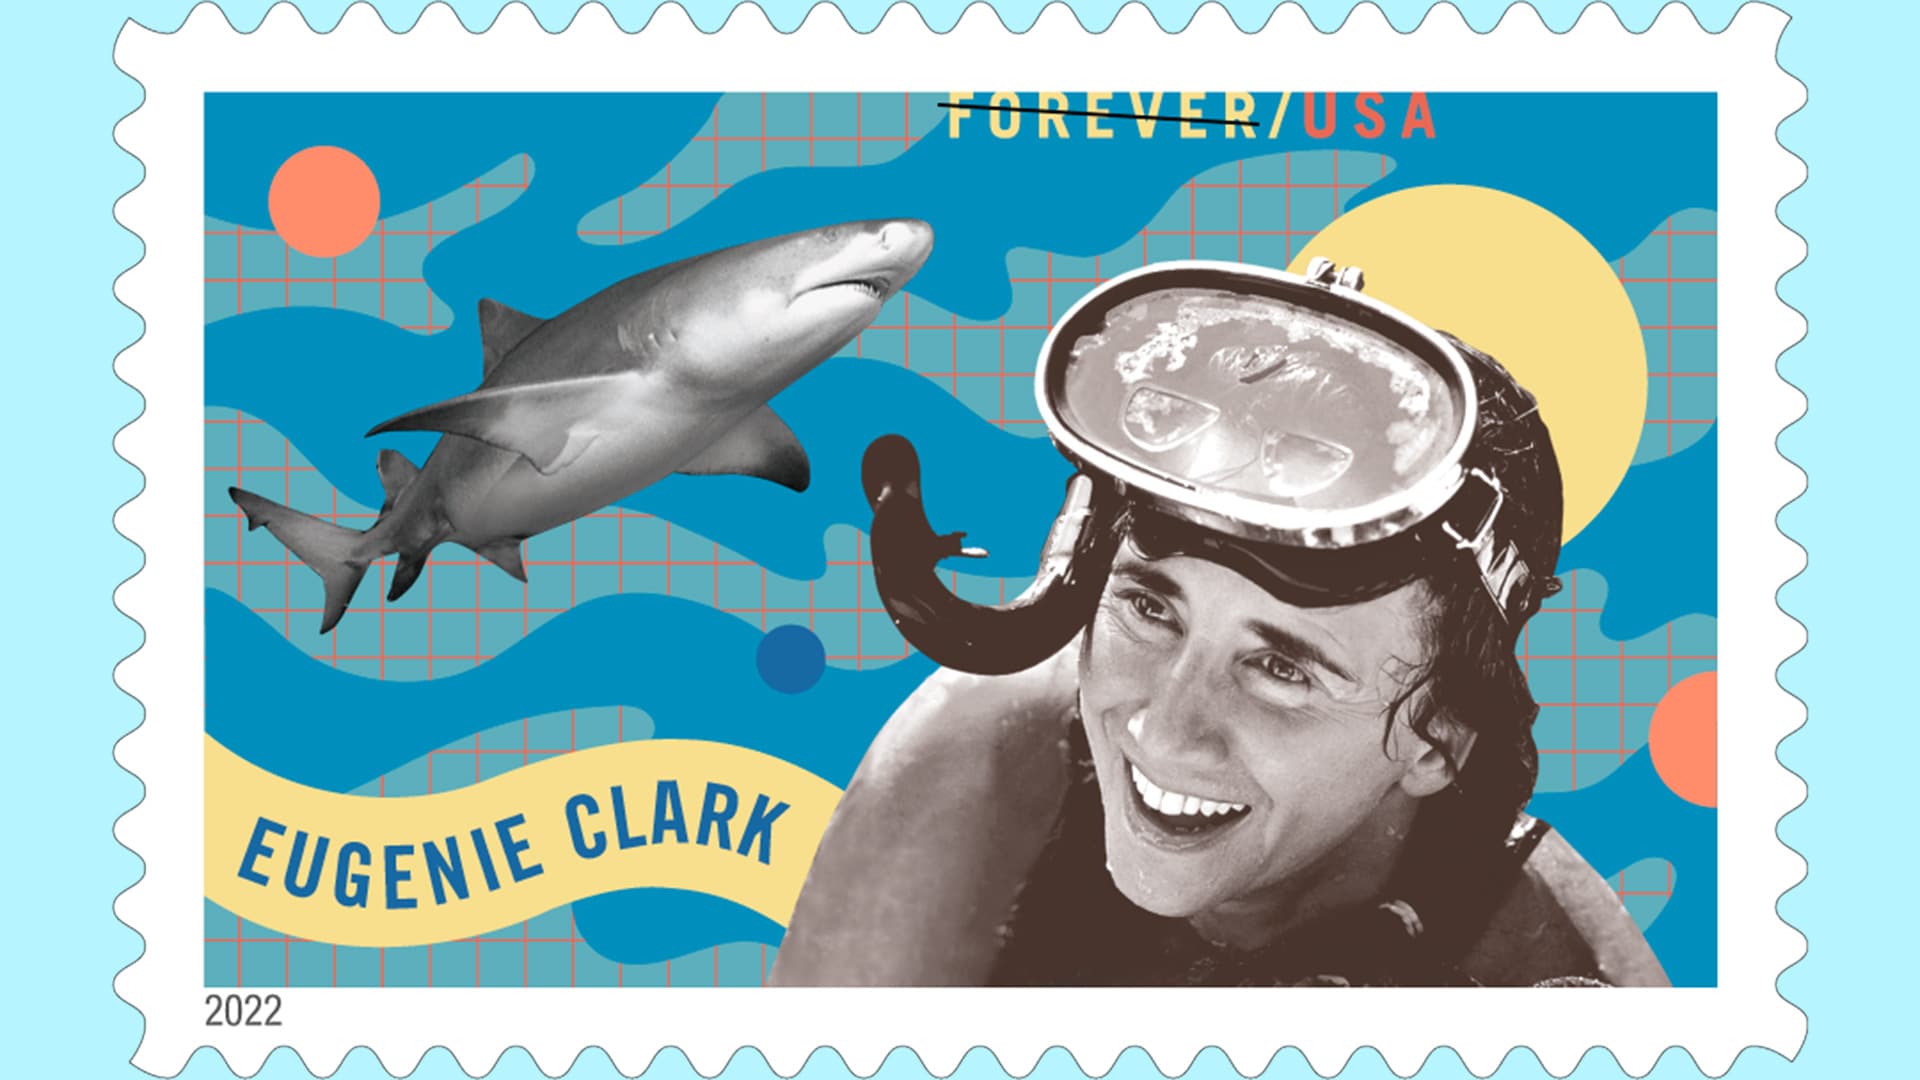 Eugenie Clark in black and white wearing a snorkel on a blue Forever USA stamp with a black and white shark next to her